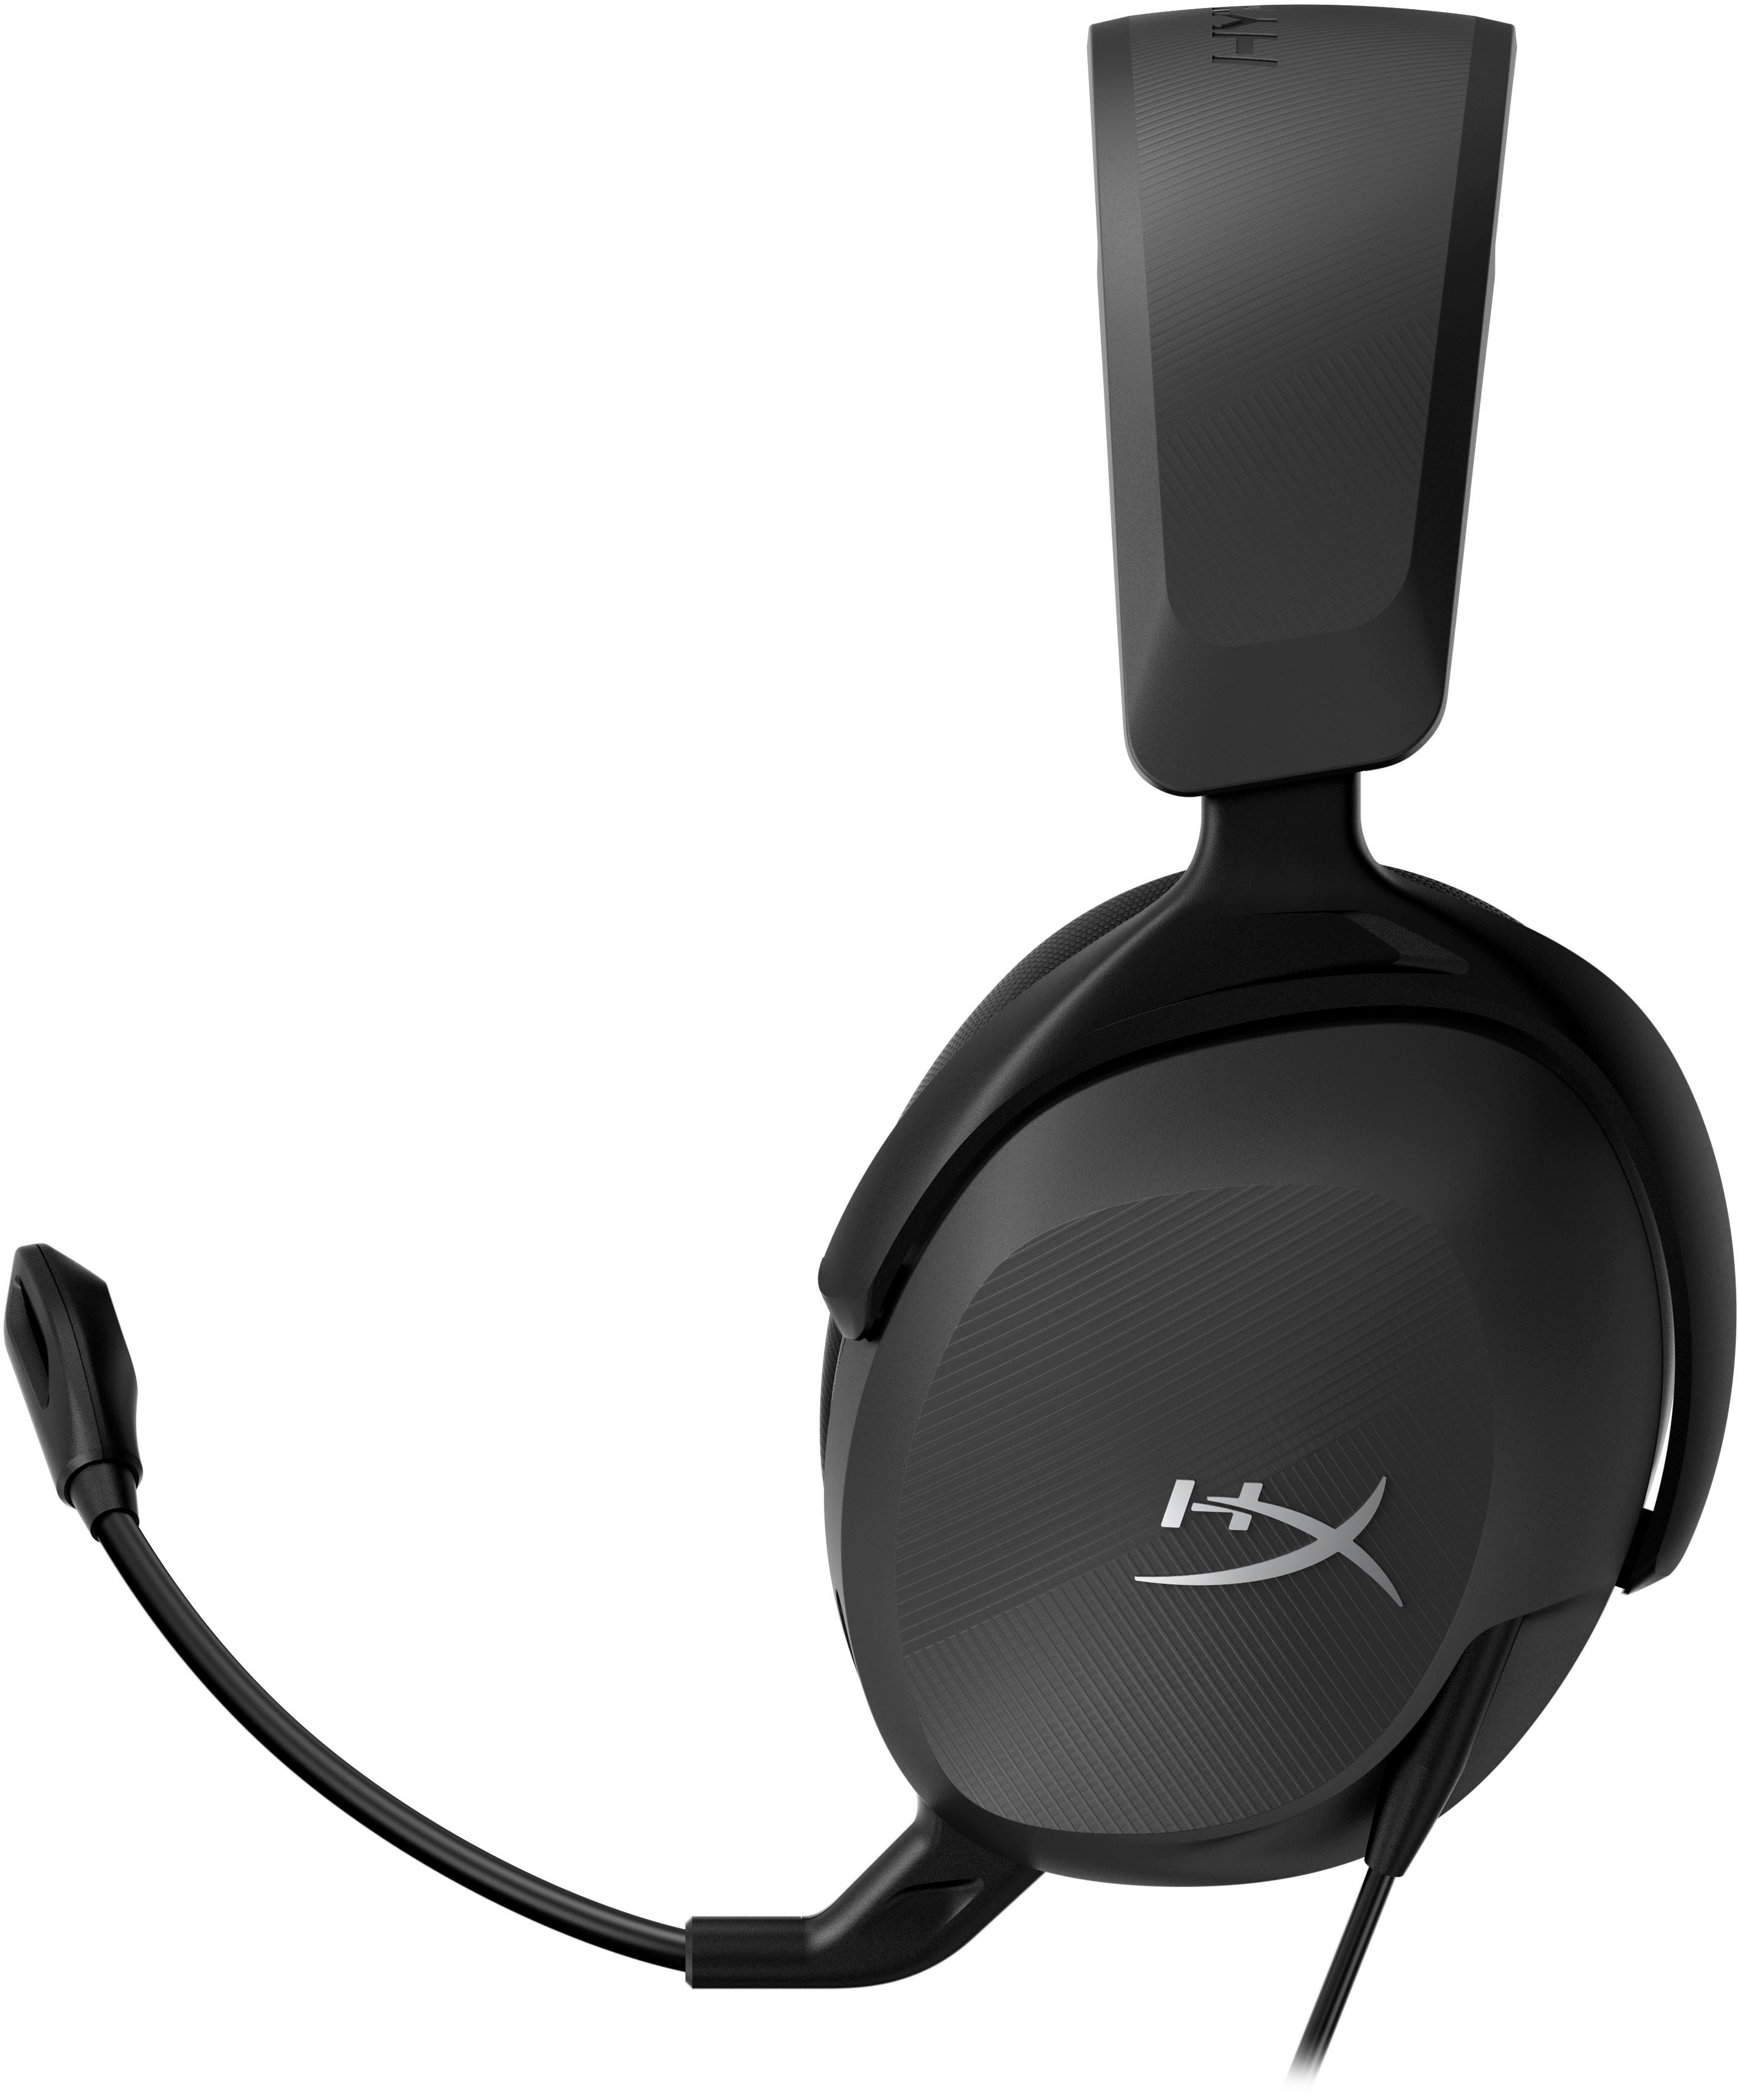 Angle View: NZXT - Relay Wired Gaming Headset for PC - Black